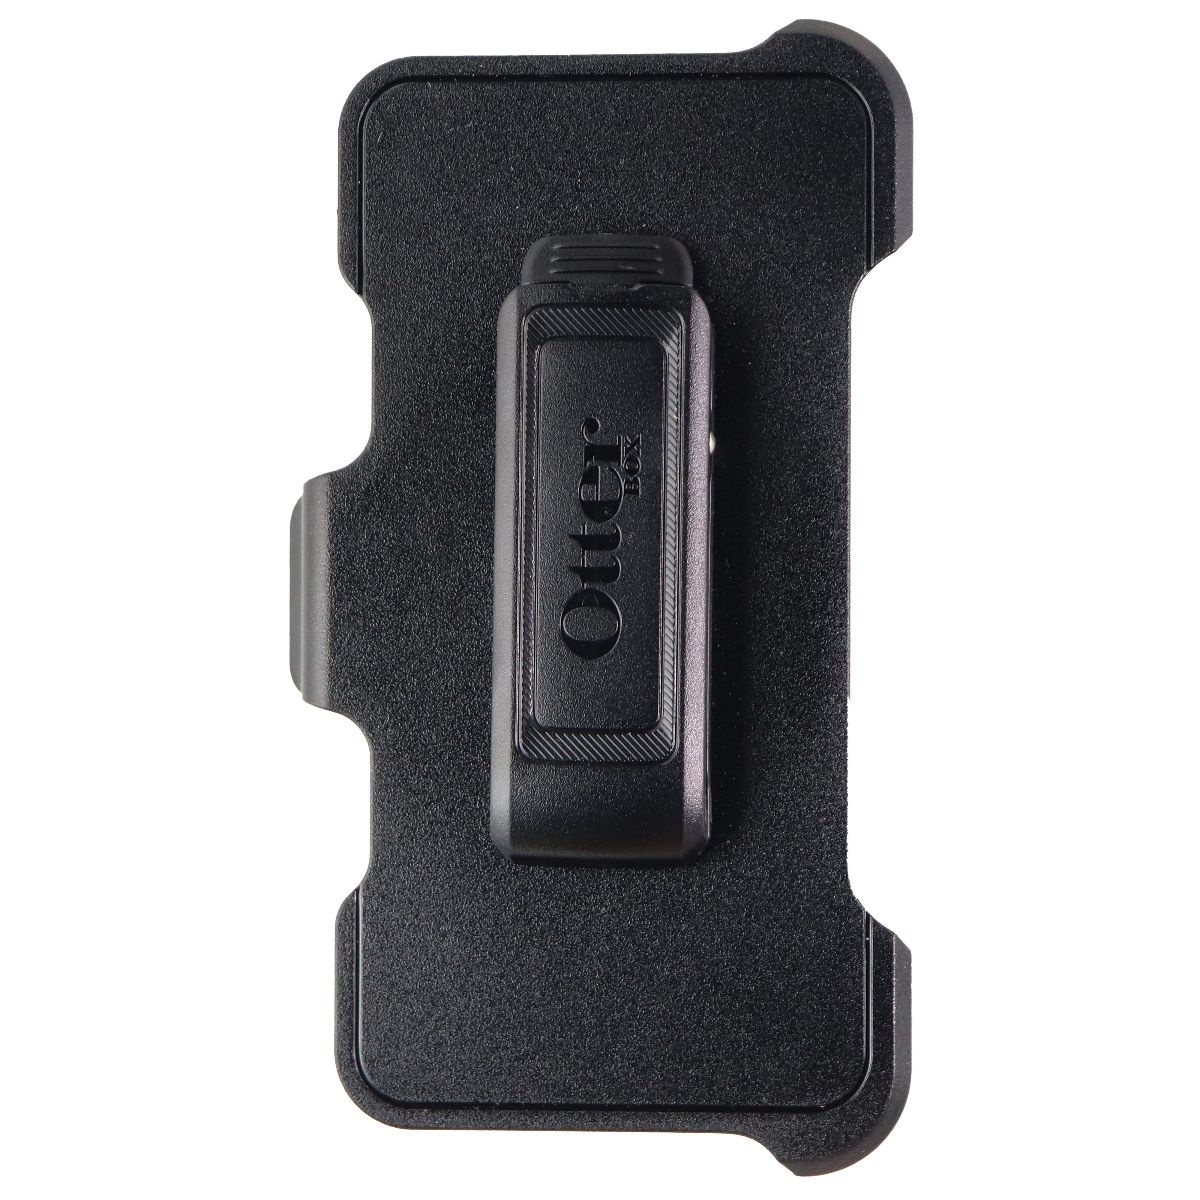 Pre-Owned OtterBox Replacement Holster Clip for iPhone SE (2nd Gen) & 8/7 Defender Cases - image 2 of 3